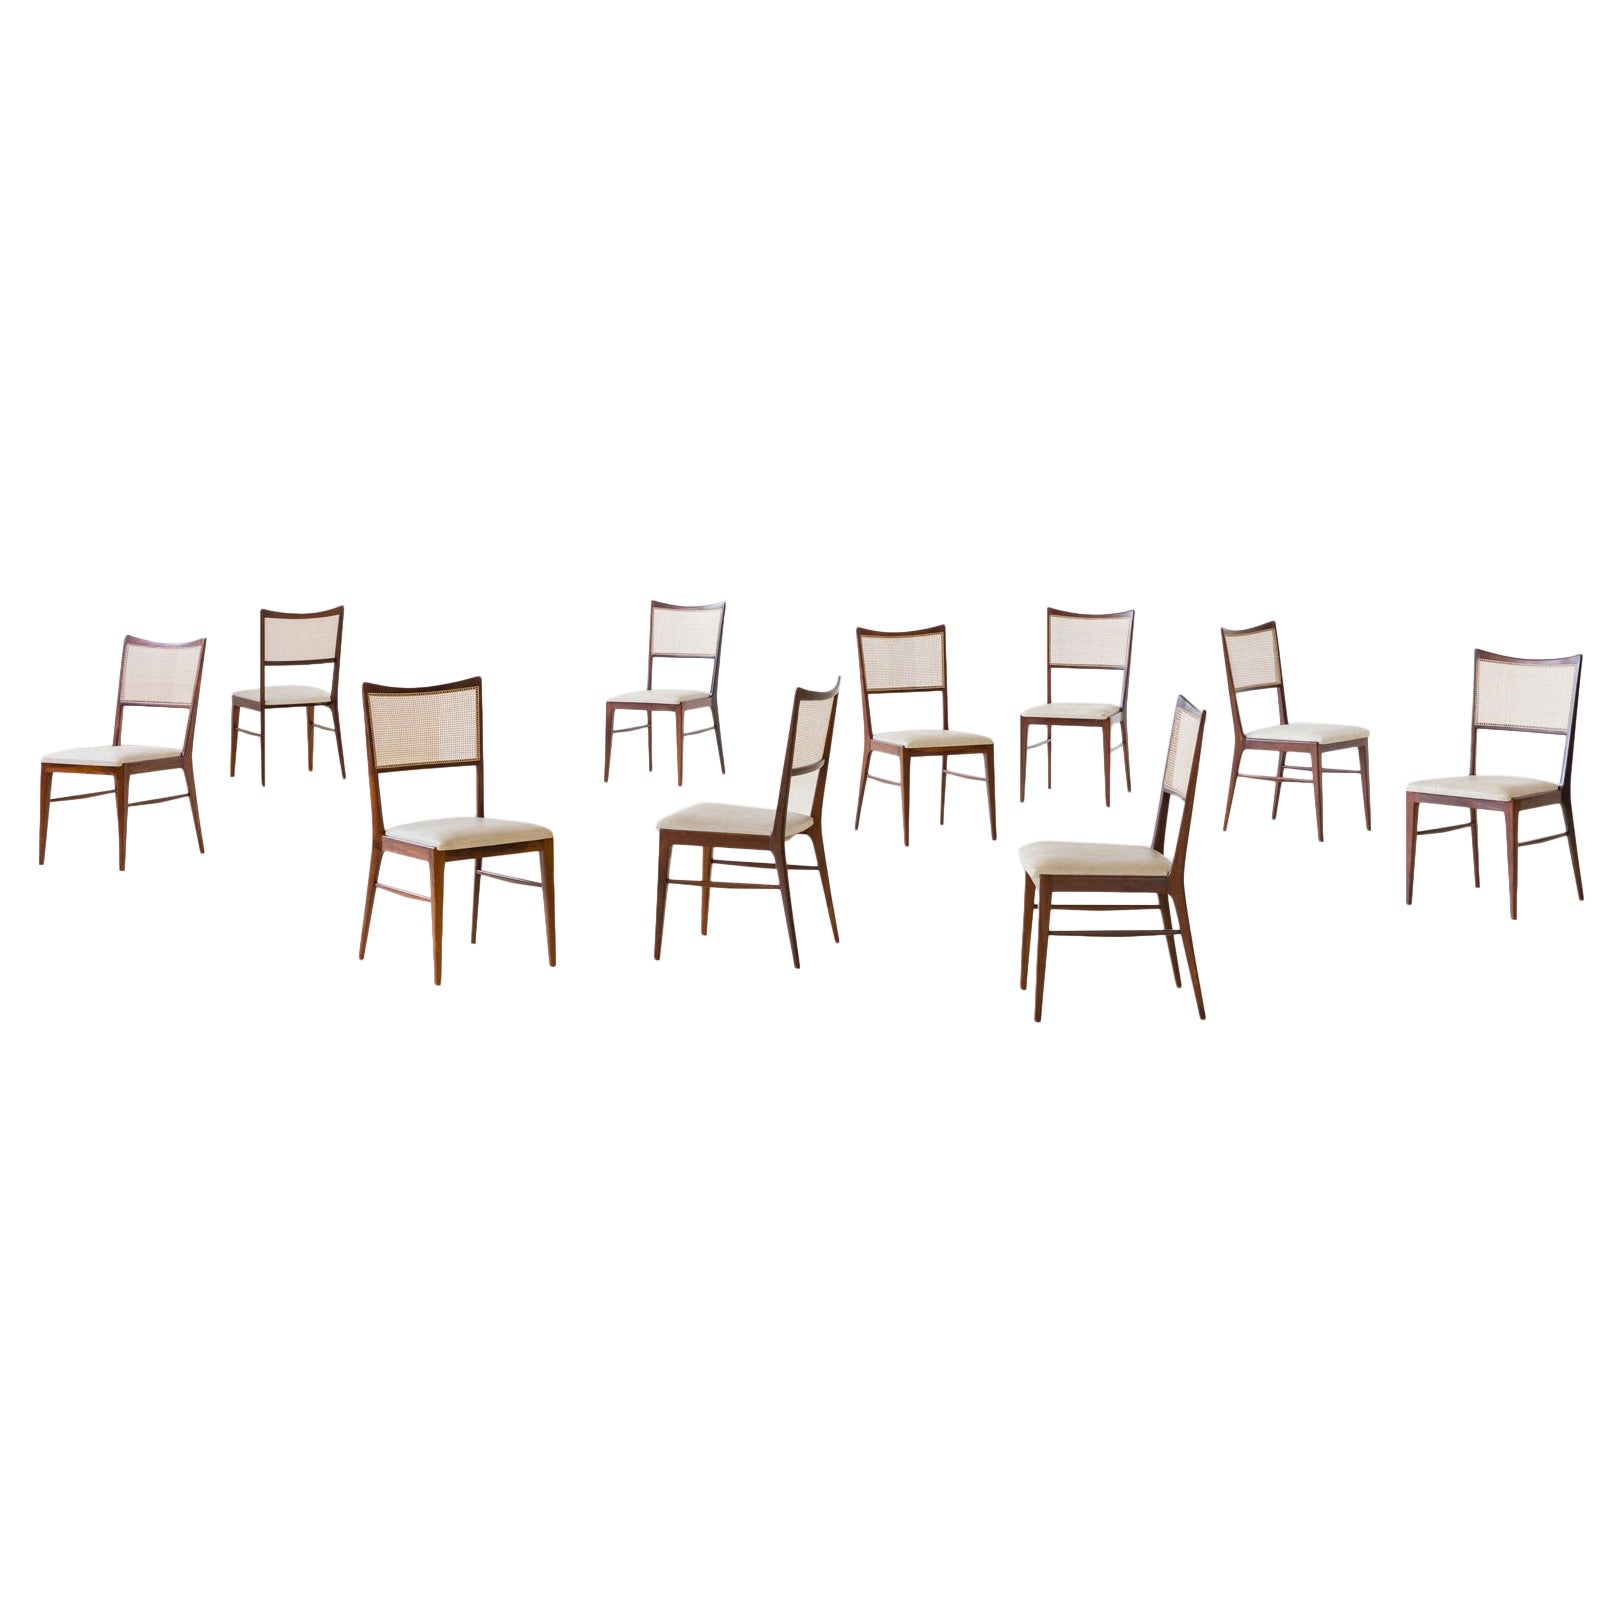 Set of 10 Rosewood and Cane Dining Chairs, Unknown Designer, 1950s For Sale